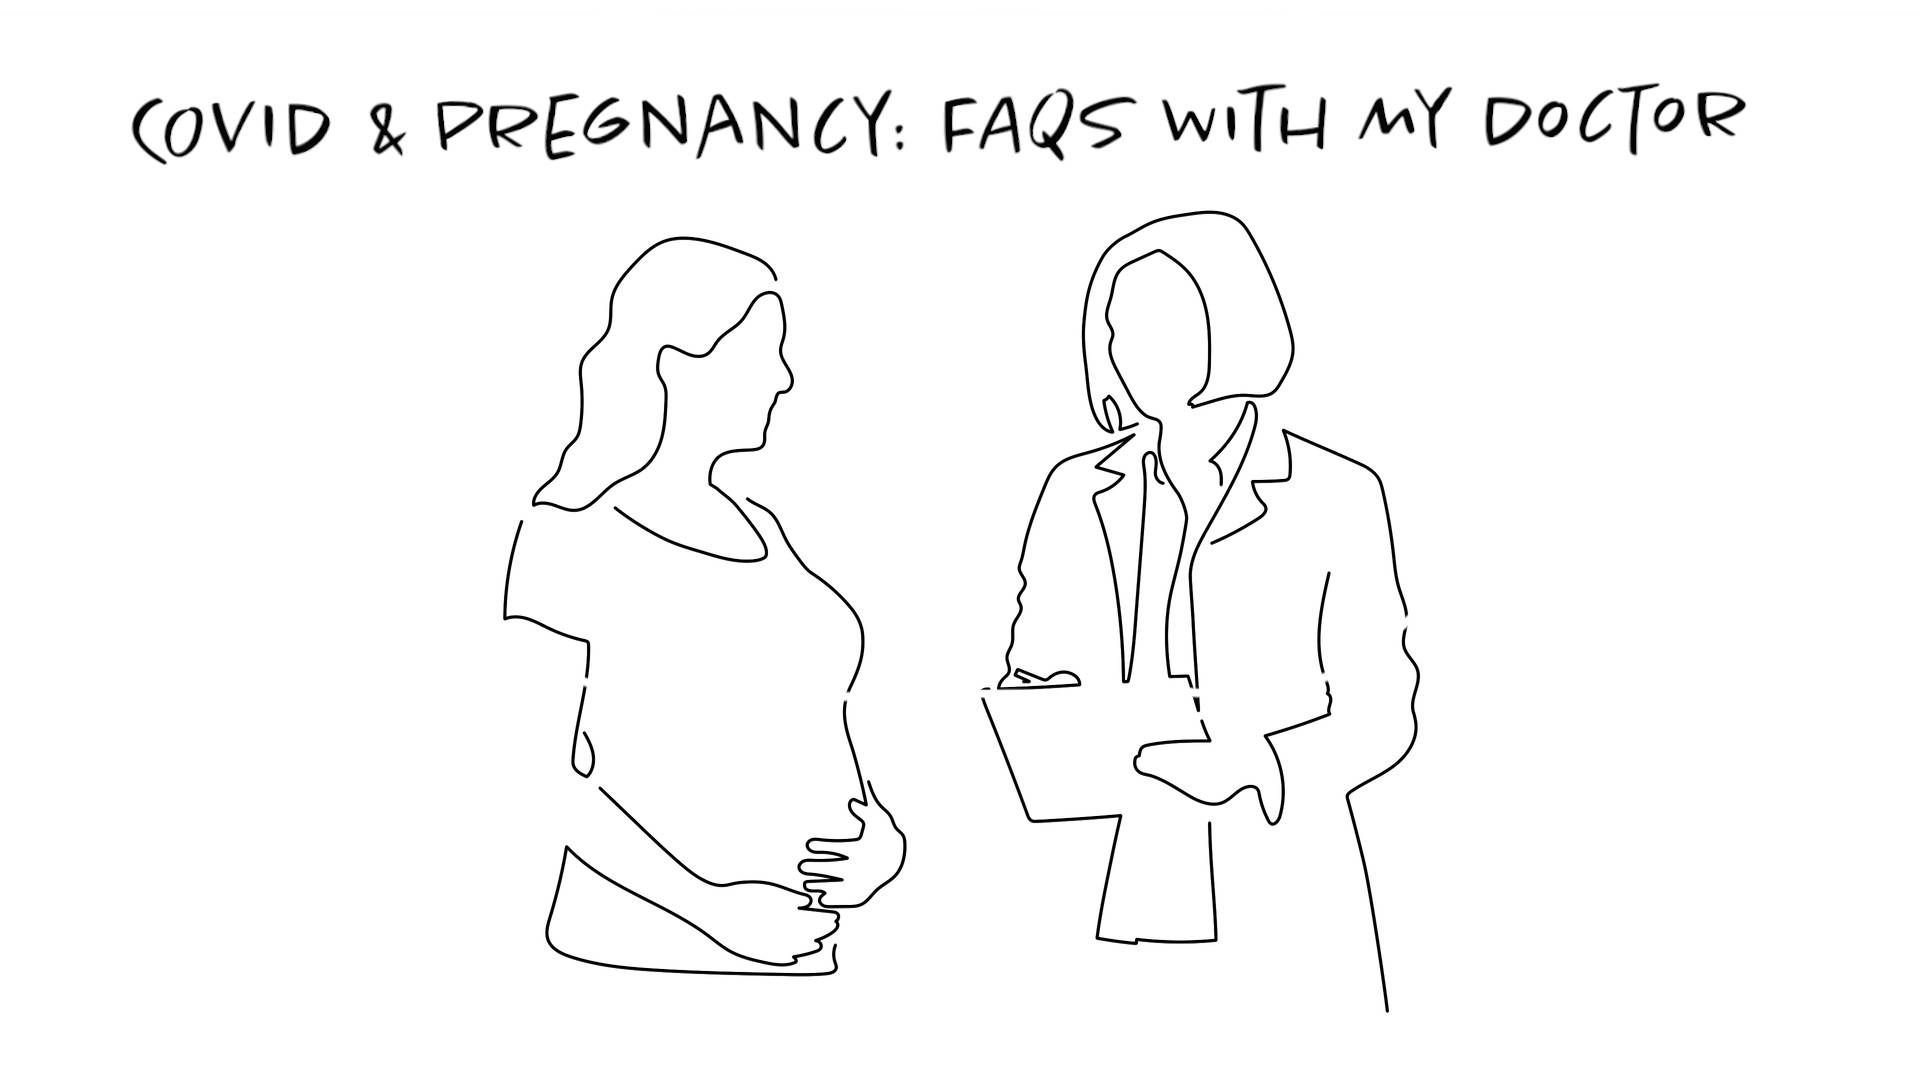 Pregnant in the Time of Coronavirus: FAQs About COVID-19 & Pregnancy